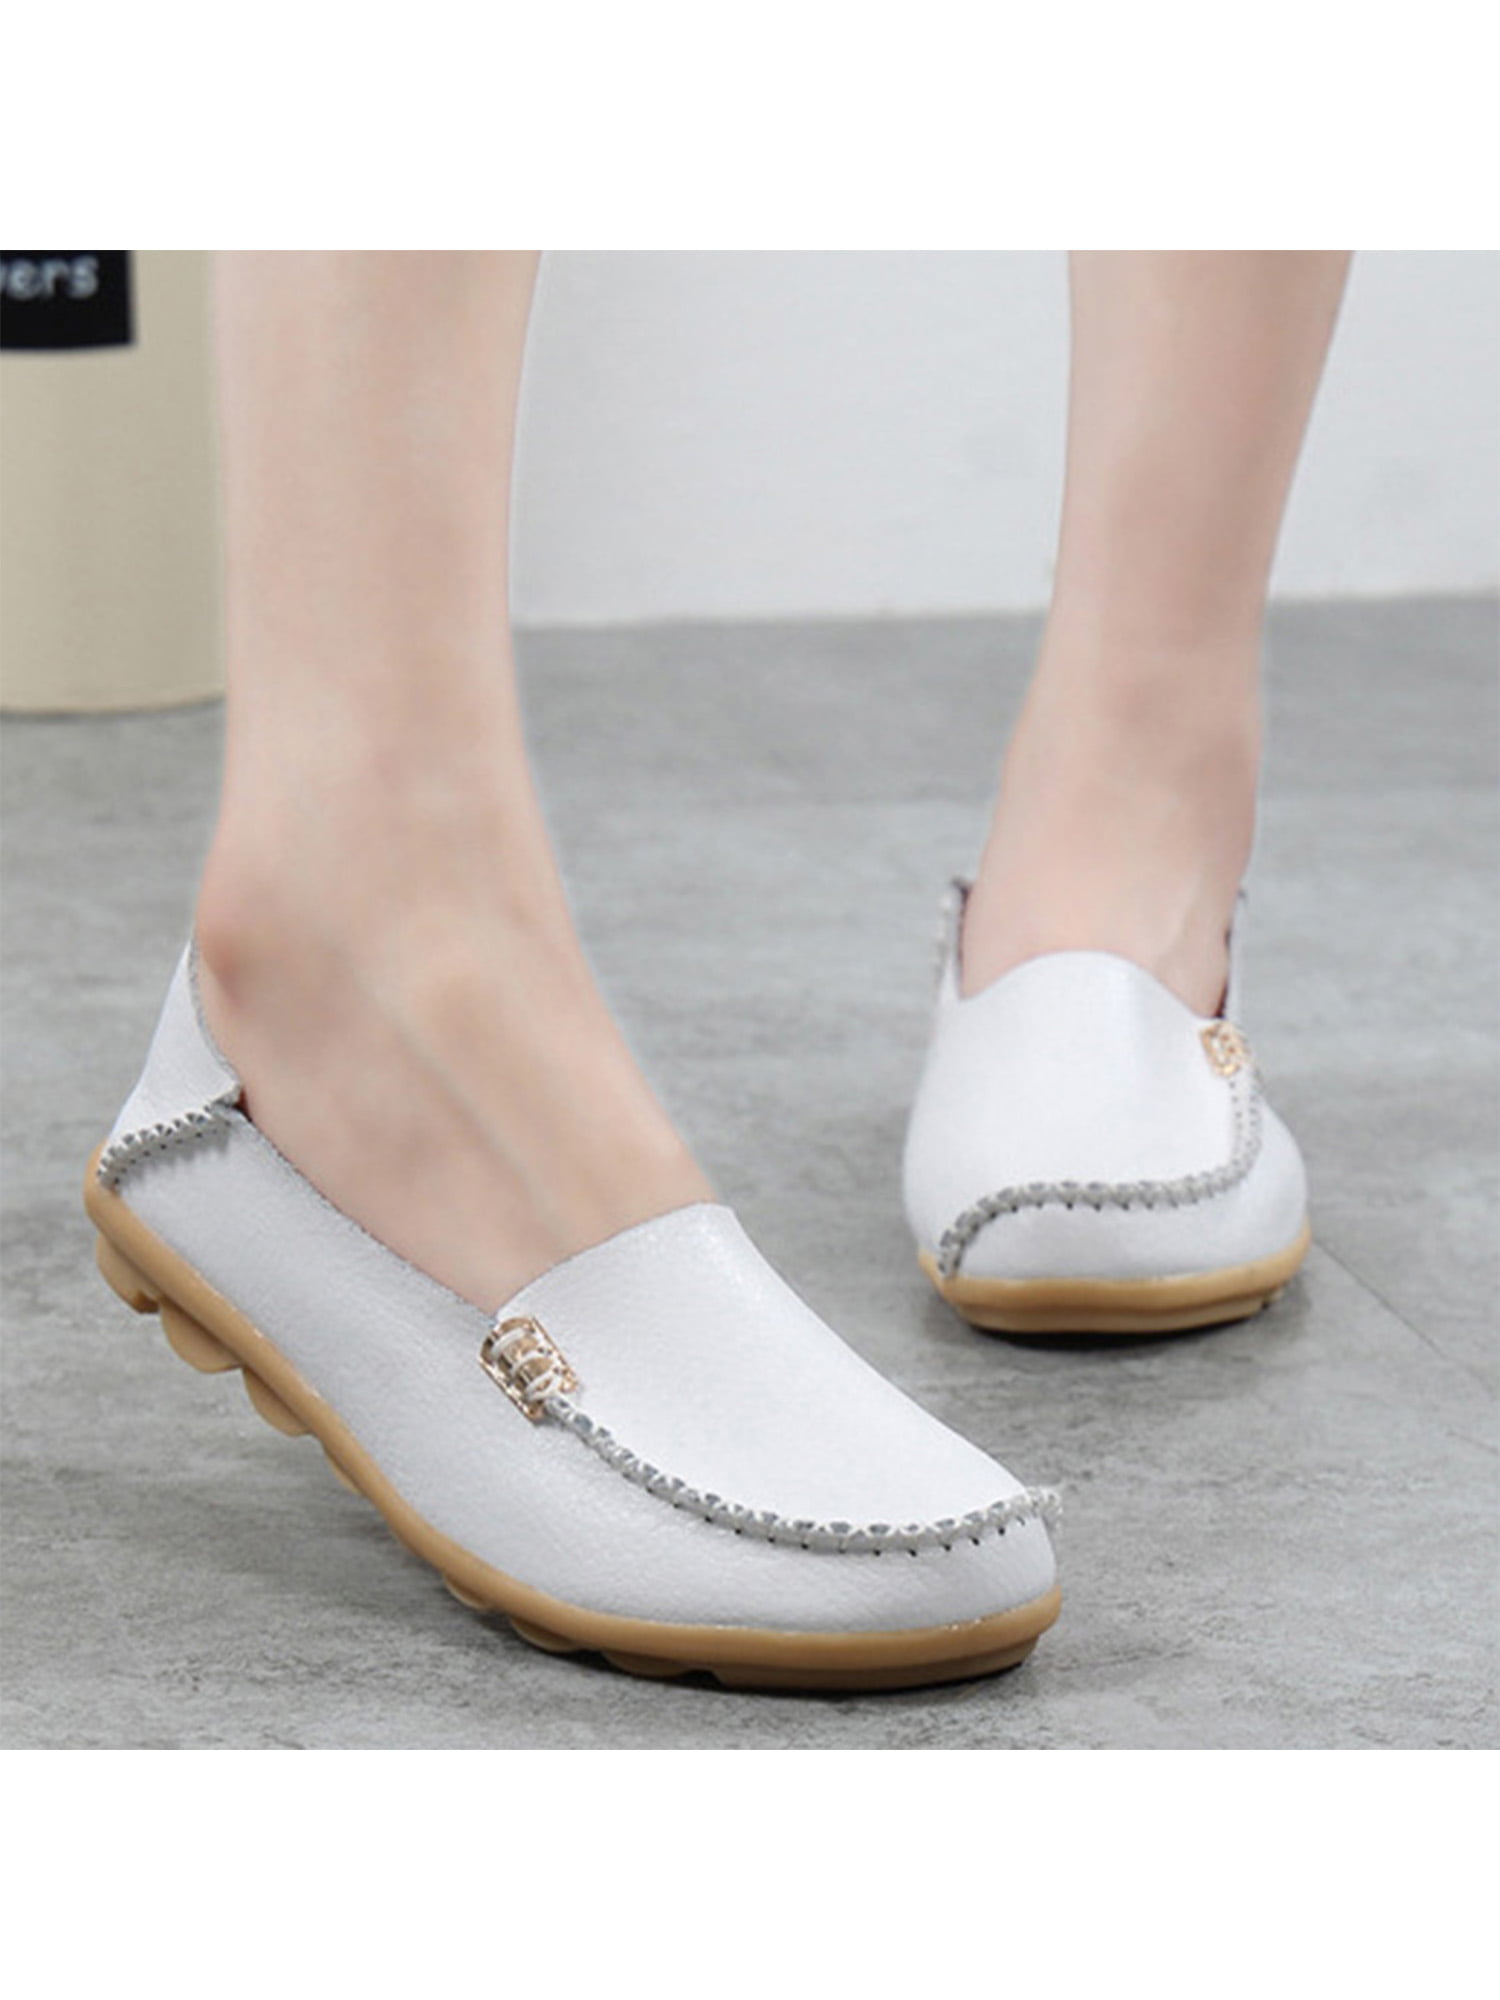 Ladies Classic Comfortable Flat Cushioned Low Slip-on Round Toe Single Shoes 2019 Hot! Women Shallow Boots 